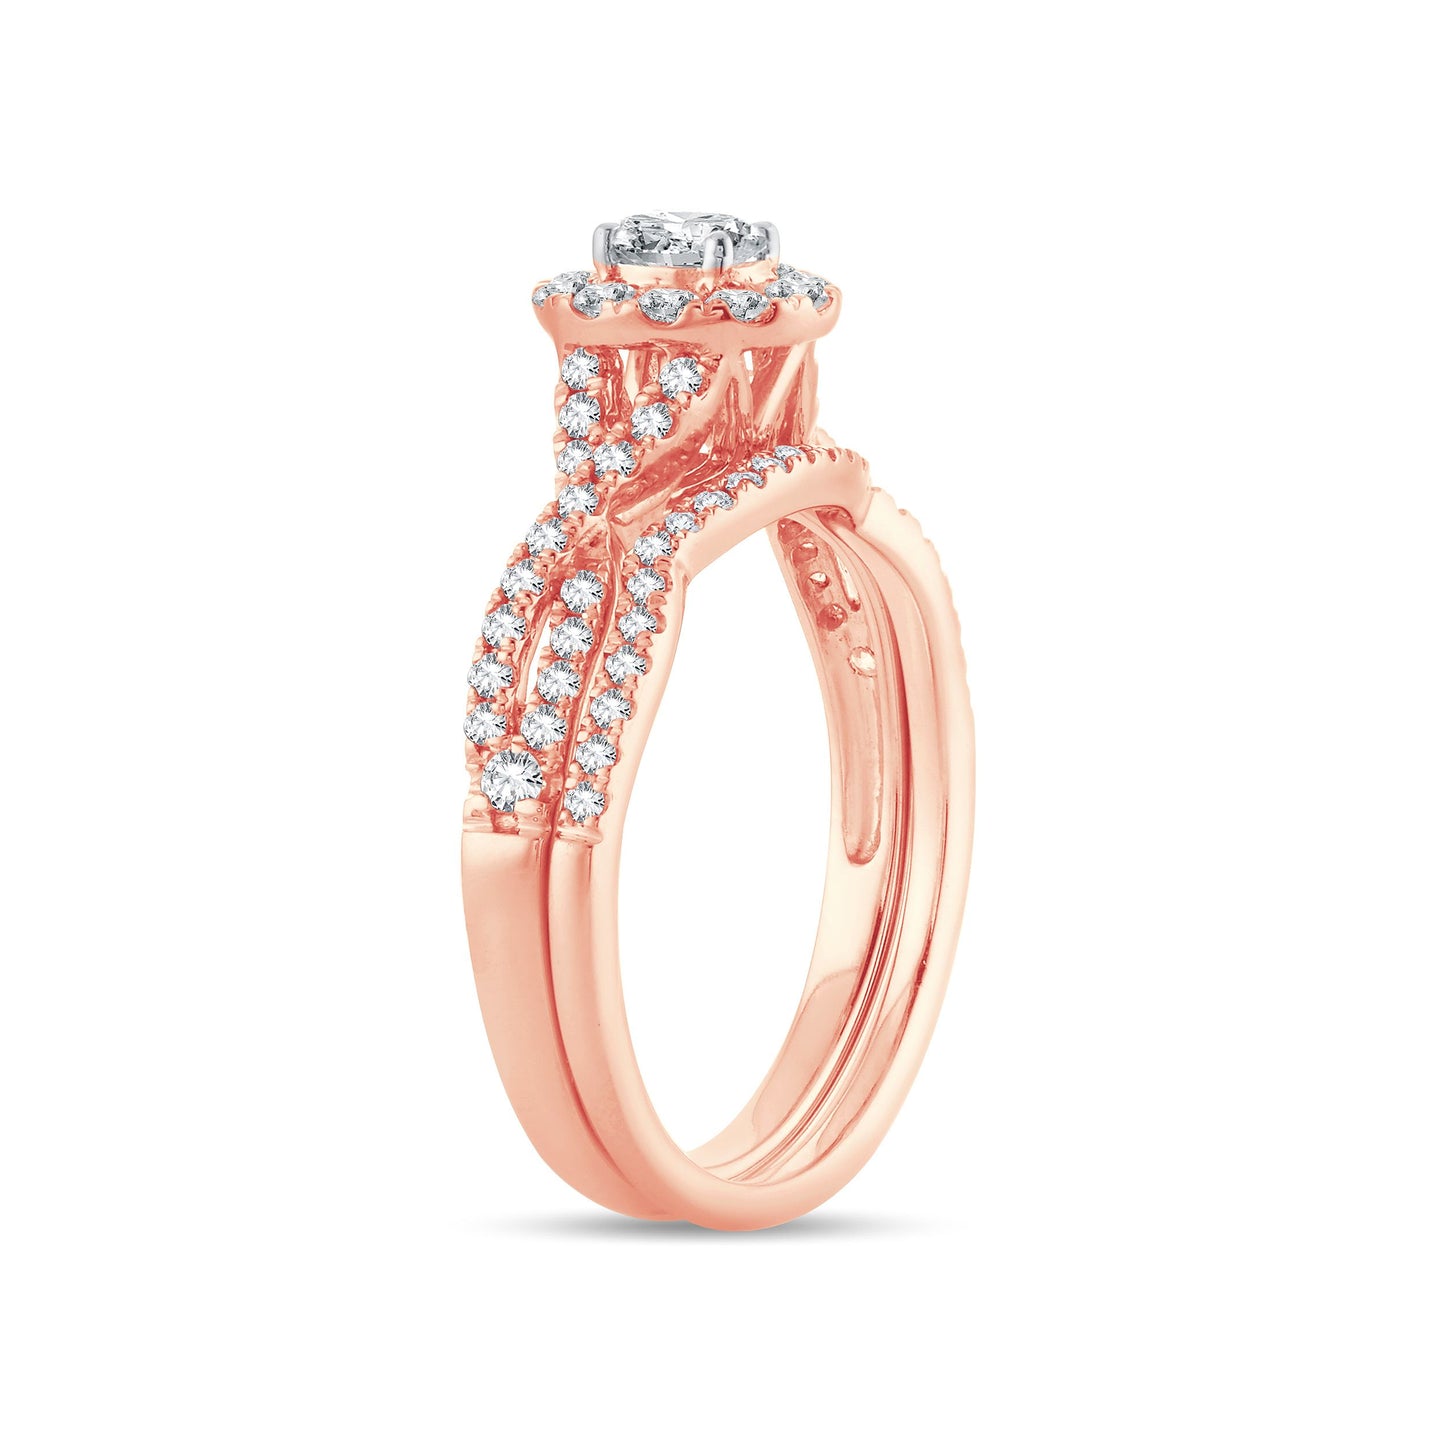 Diamond Engagement Ring with Matching Band - 0.74 Carats in 14KT Rose Gold